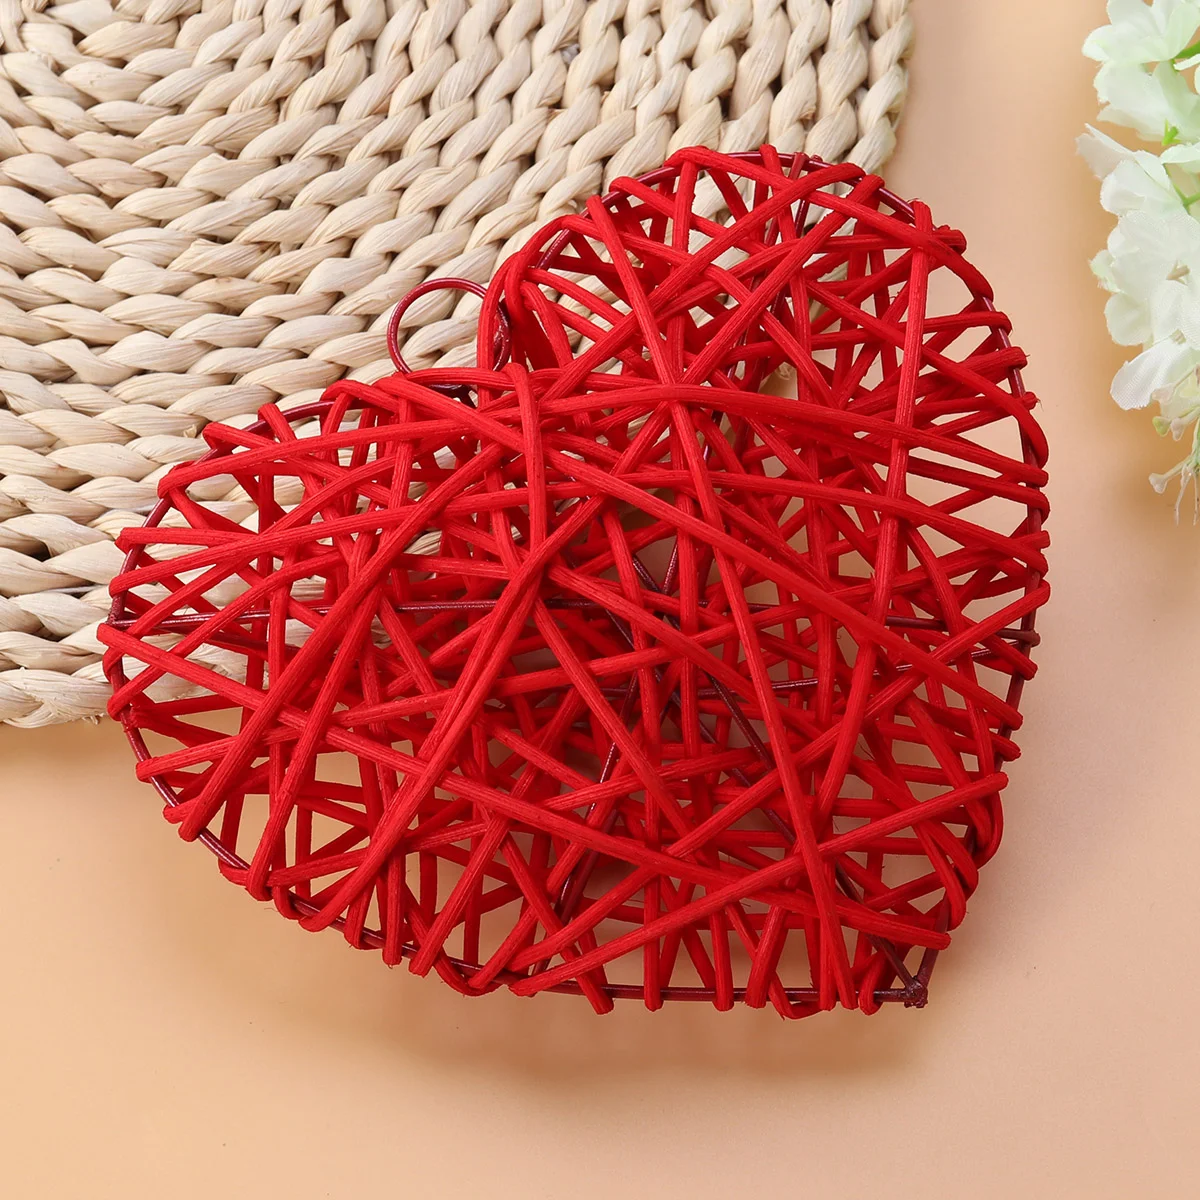 

Heart Rattan Decor Wreath Filler Craft Vase Decoration Party Home Wicker Shaped Natural Day Decorations Valentines Diy